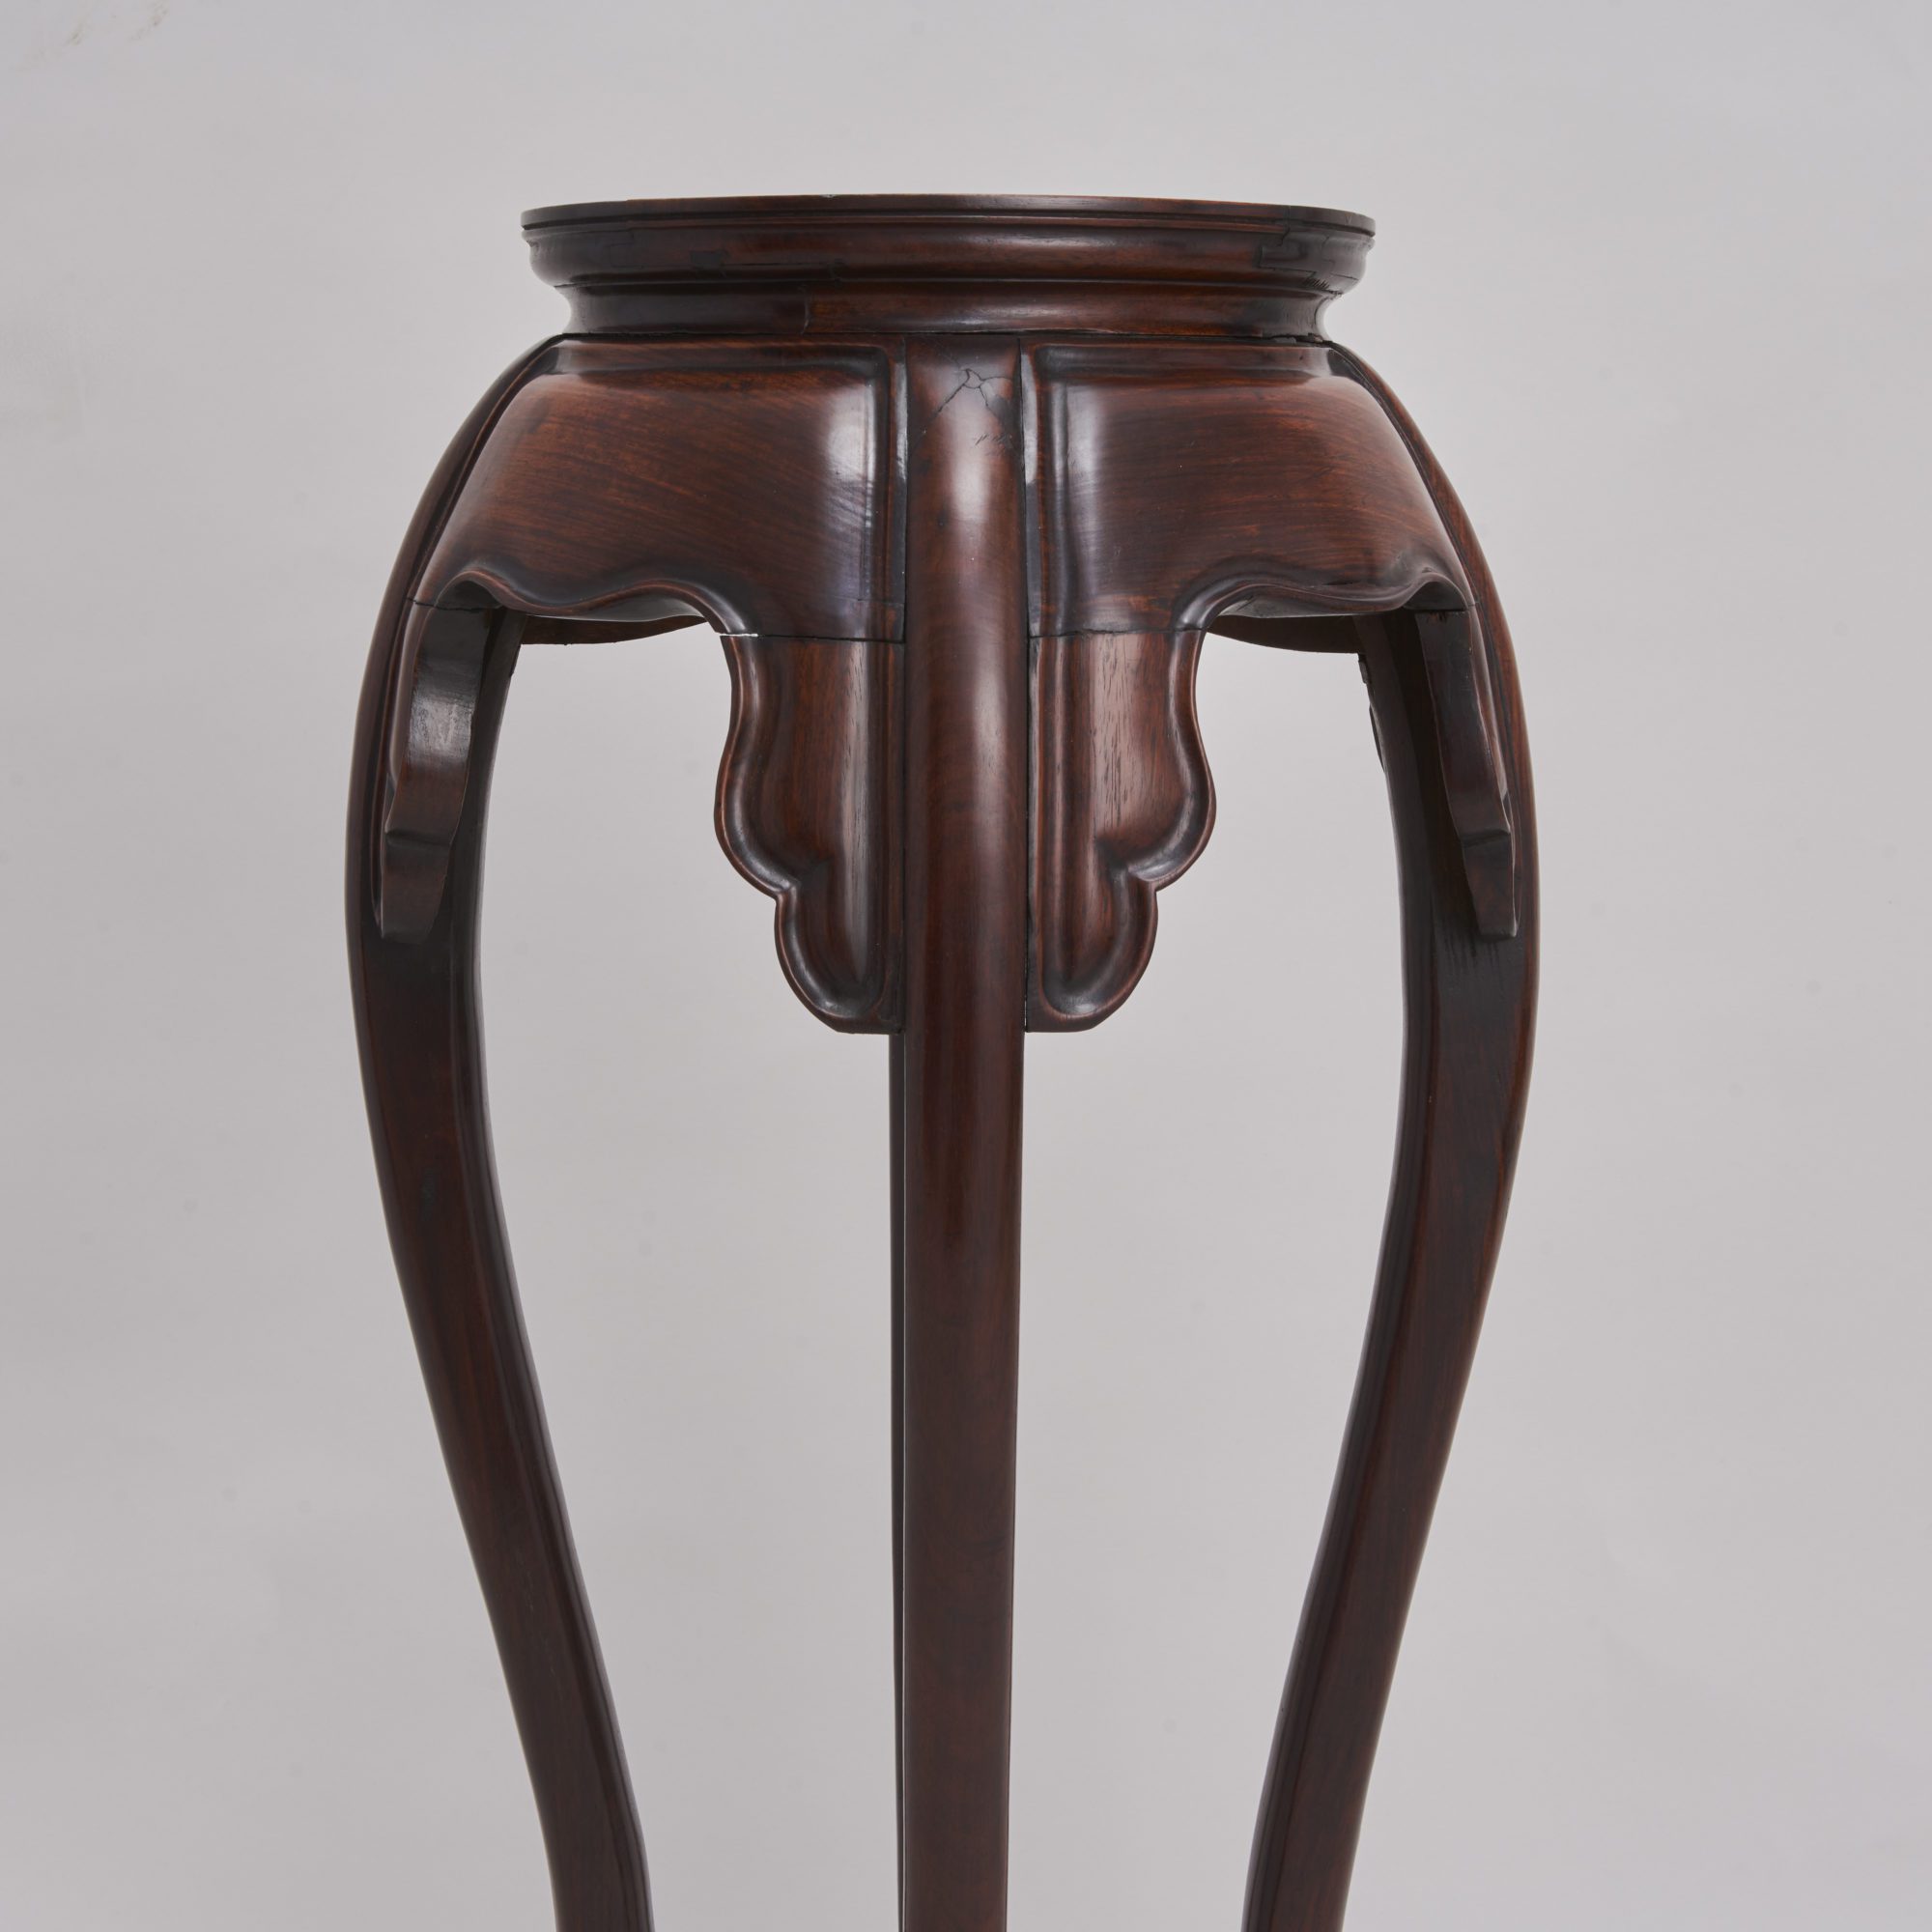 Chinese Marble Top Tall Stand, 20th c. – Showplace